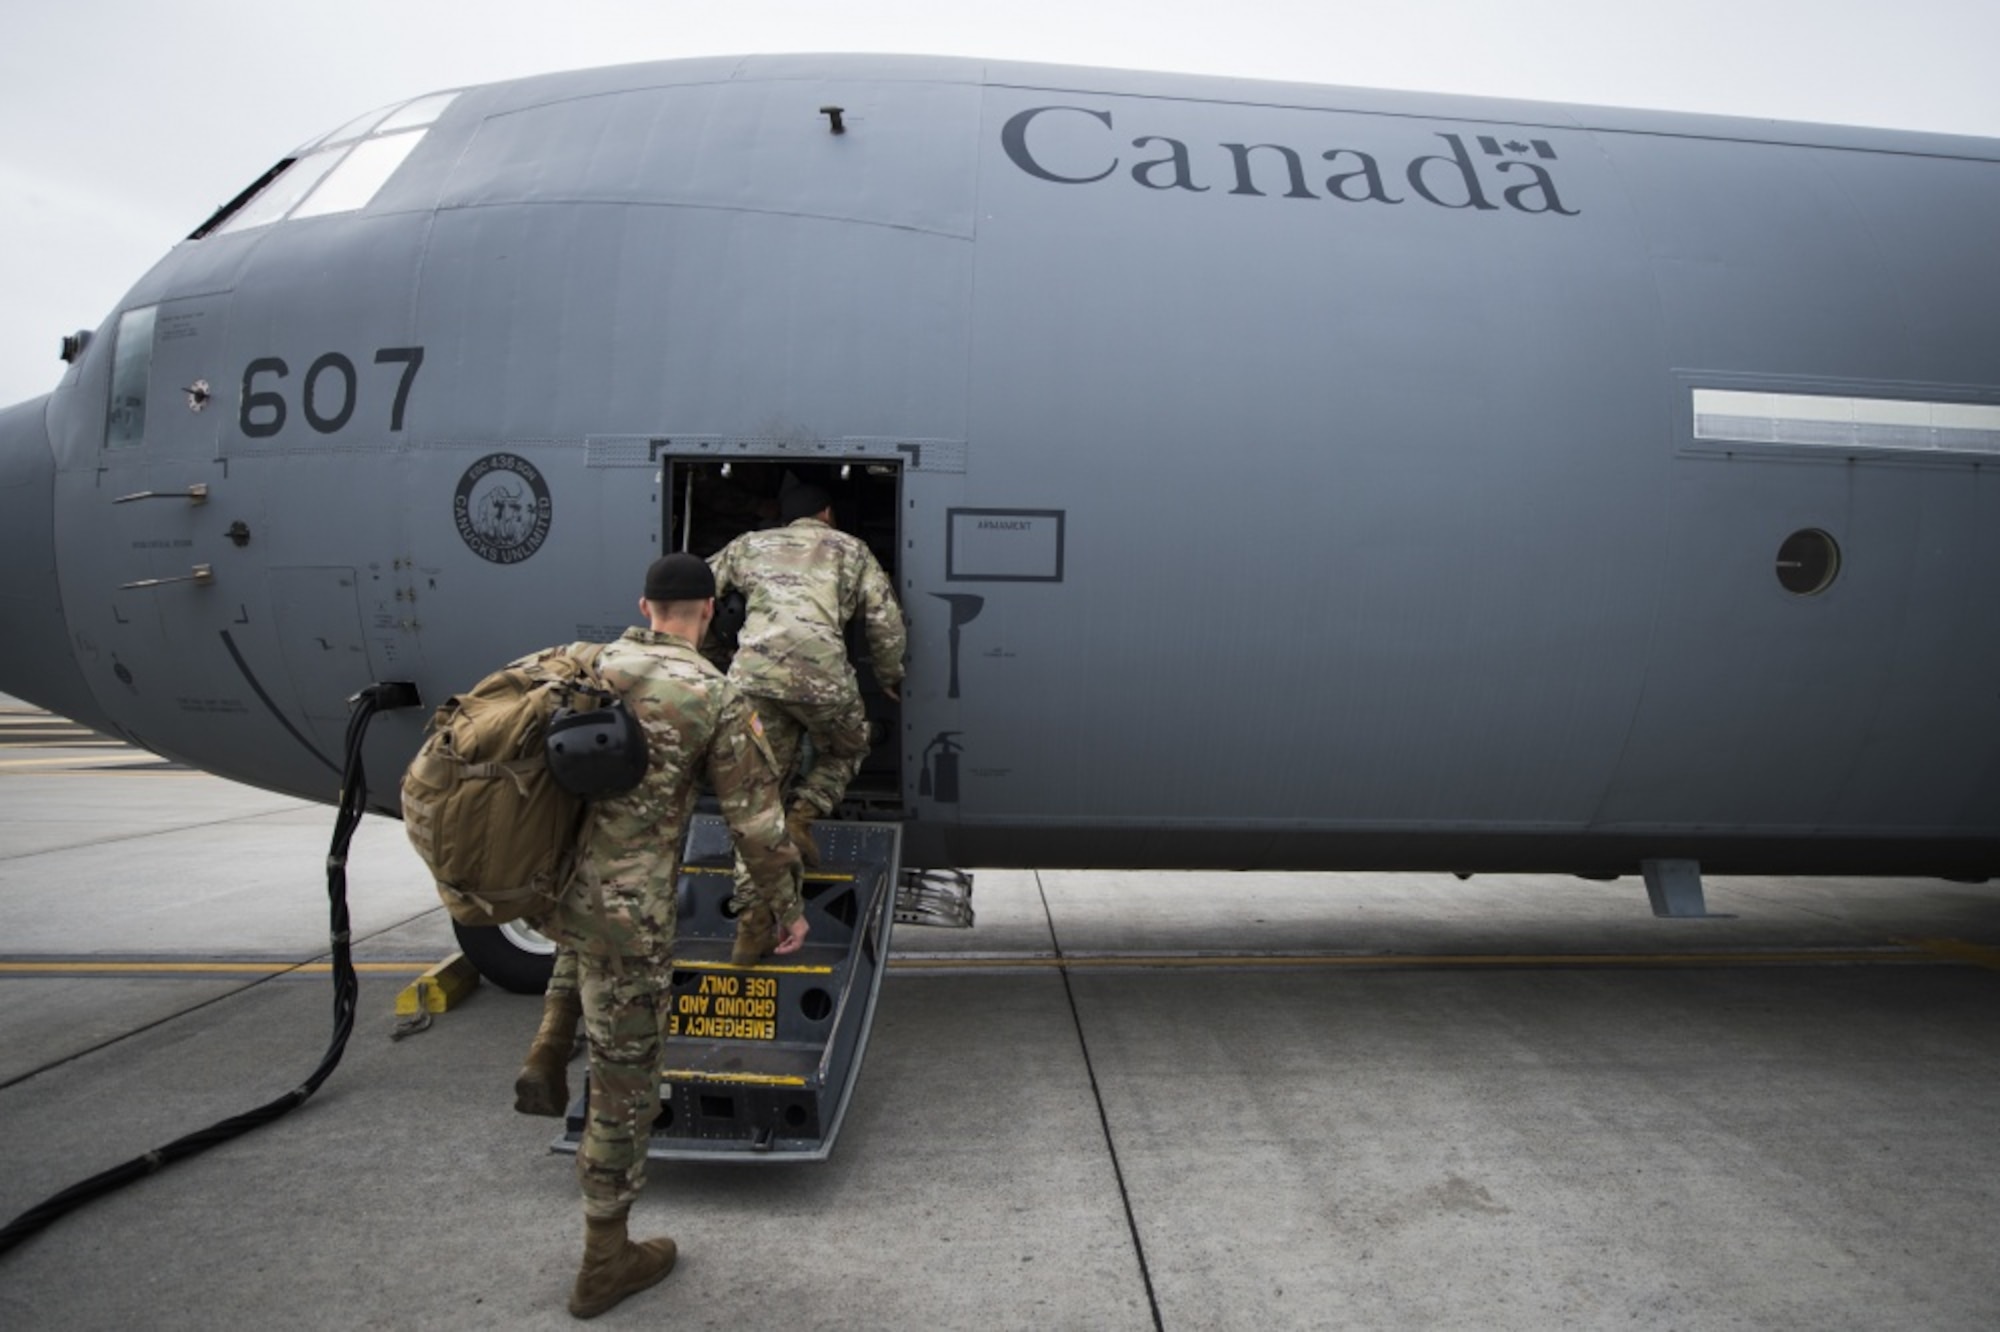 U.S. Army Soldiers board a Royal Canadian Air Force CC-130J Super Hercules, 436 Transport Squadron, assigned to 8 Wing Trenton, Trenton, Ontario, Canada, for the Selah Creek air base opening training scenario during Mobility Guardian 2019, Fairchild Air Force Base, Washington, Sept. 14, 2019. Exercise Mobility Guardian is Air Mobility Command's premier, large scale mobility exercise. Through robust and relevant training, Mobility Guardian improves the readiness and capabilities of Mobility Airmen to deliver rapid global mobility and builds a more lethal and ready Air Force. (U.S. Air Force photo by Tech. Sgt. Larry E. Reid Jr.)